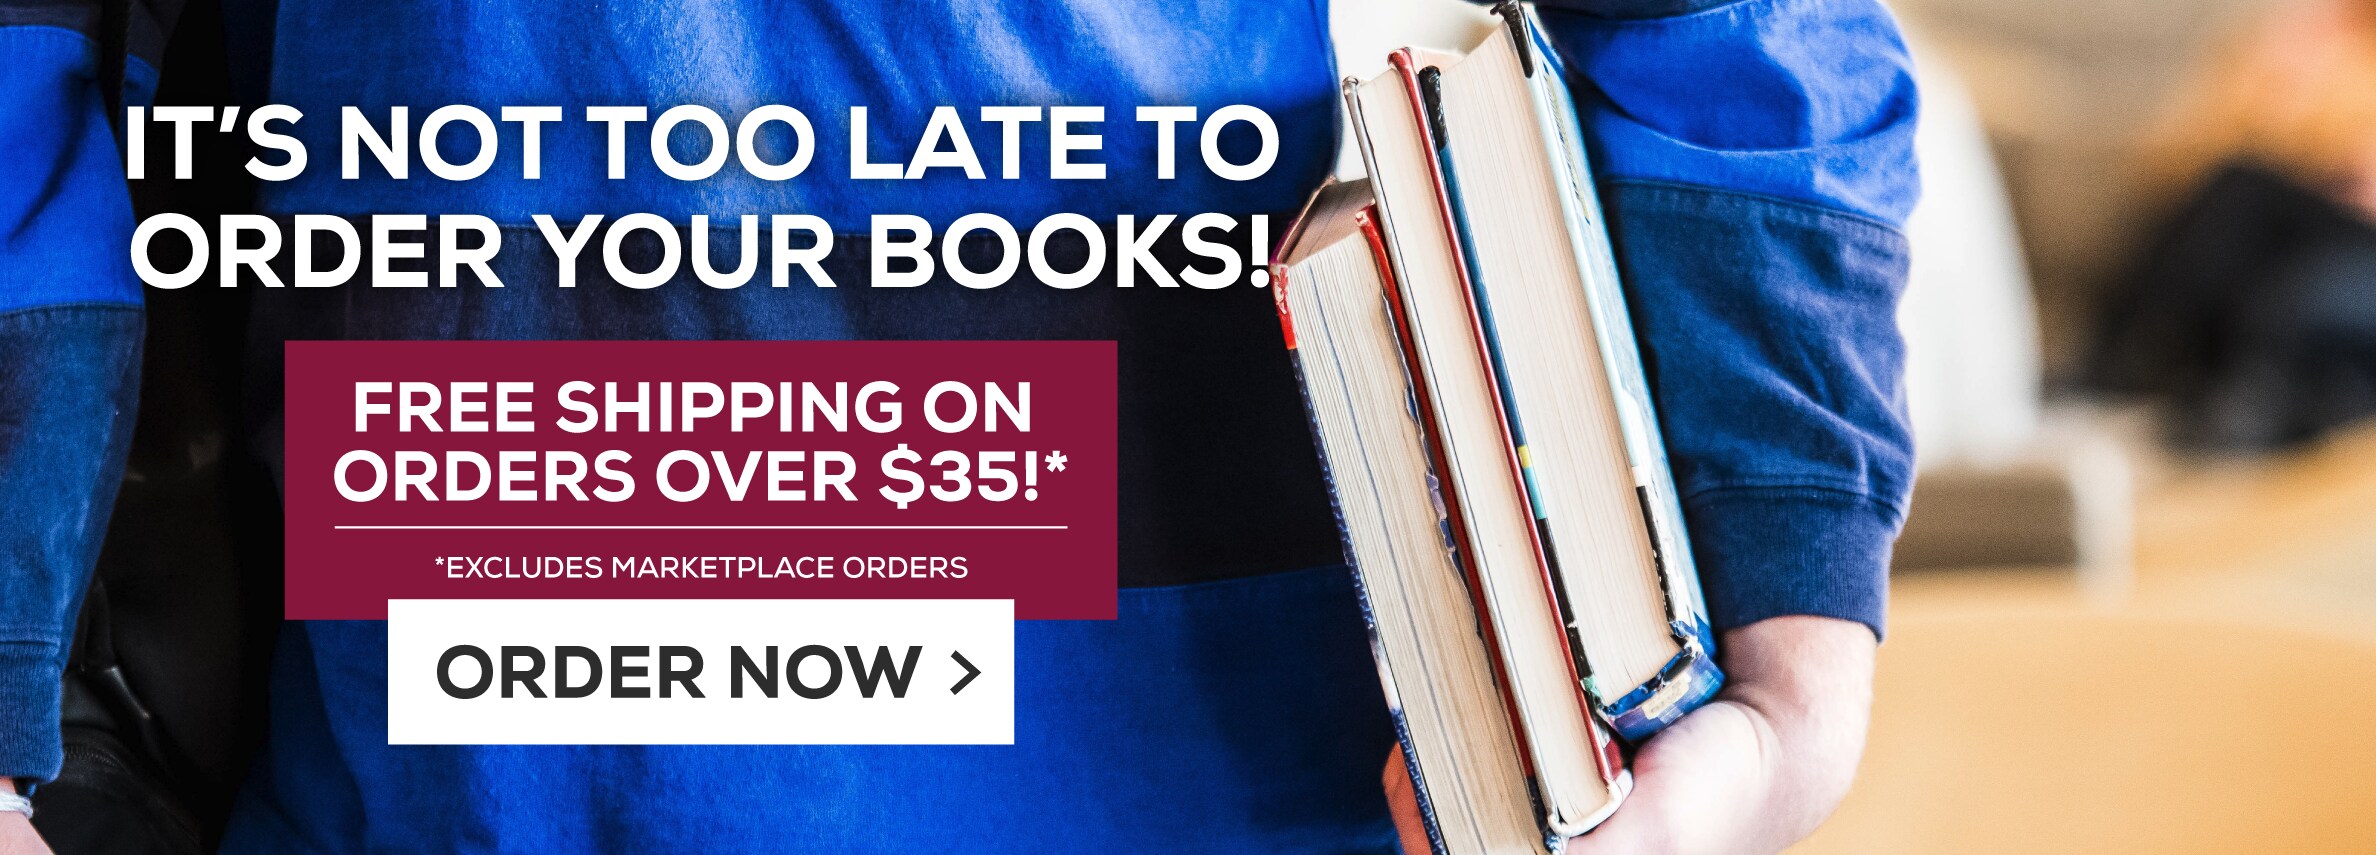 ItÃ¢â‚¬â„¢s not too late to order your books! Free shipping on all orders over $35!* *Excludes Marketplace purchases. Order Now.